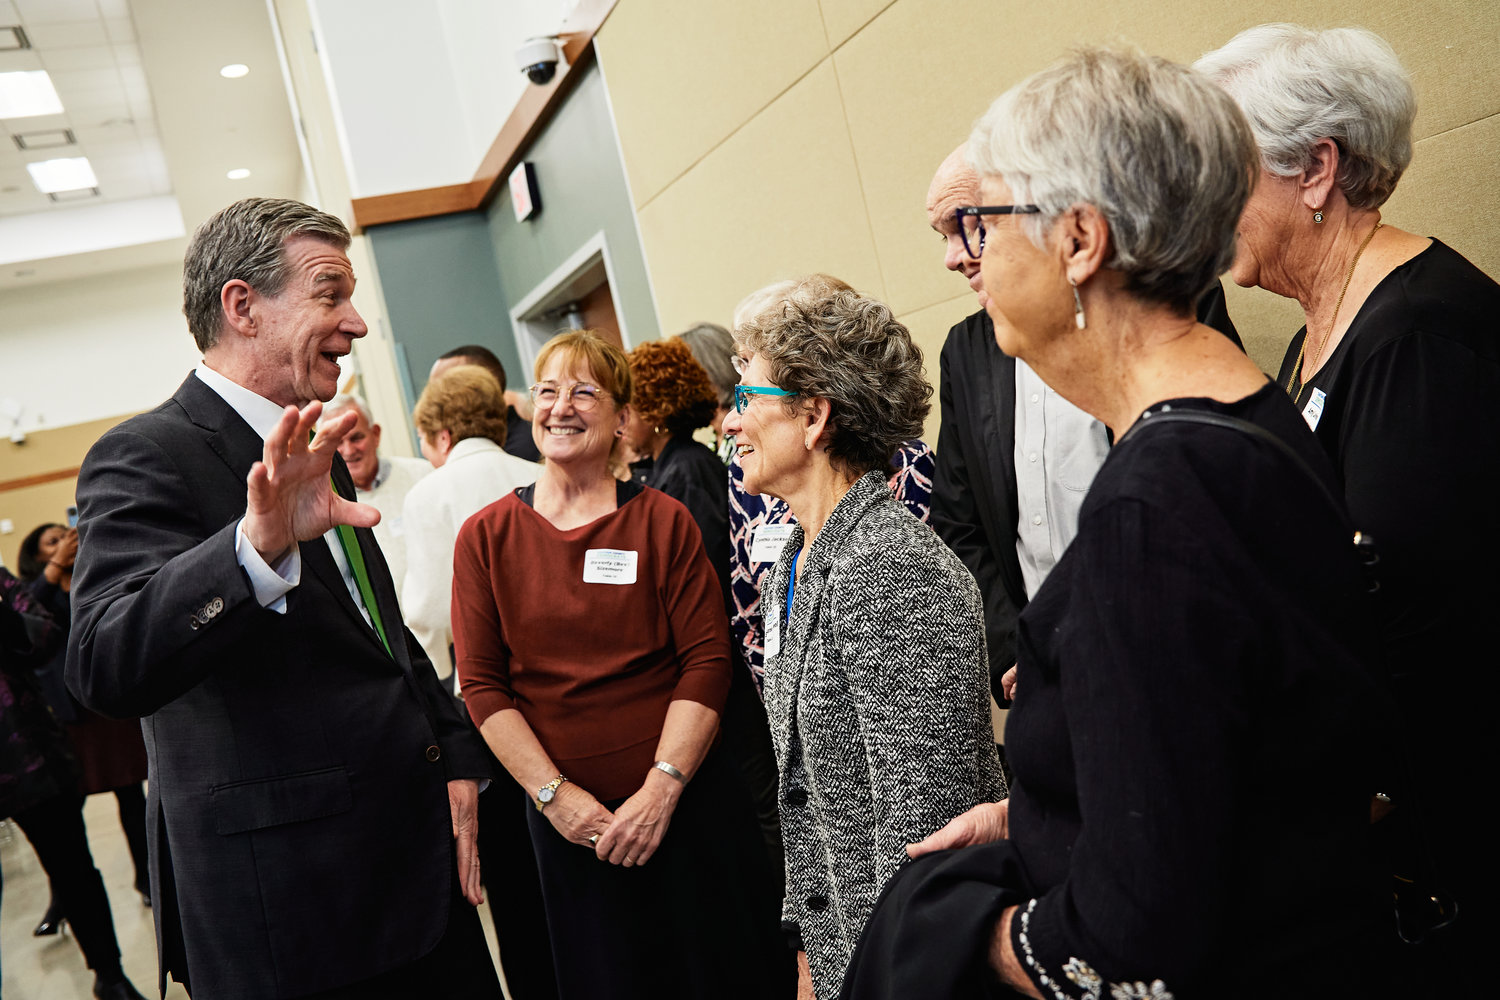 N.C. Gov. Roy Cooper visited Chatham County last Thursday, attending a Democratic Party event in Pittsboro at the invitation of Rep. Robert Reives II. Cooper, shown speaking with some attendees at the event, helped honor county volunteers and donors. ‘Our officer team is deeply indebted to Robert Reives’ campaign for making our event so incredibly successful,’ said Liz Guinan, who’s stepping down from the local party’s chairperson position. ‘Robert’s generous spirit is on display to all of us in Chatham County, as witnessed by his devotion to bringing manufacturing jobs to Chatham, his work in addressing Pittsboro’s water issues, his cooperation in negotiating a state budget, and a host of issues he fights for every day. Robert consistently works to improve lives in Chatham County, regardless of party affiliation. We cannot thank him enough.’ Cooper, Reives. Sen. Natalie Murdock and others spoke at the event, held at the Chatham County Agriculture & Conference Center.